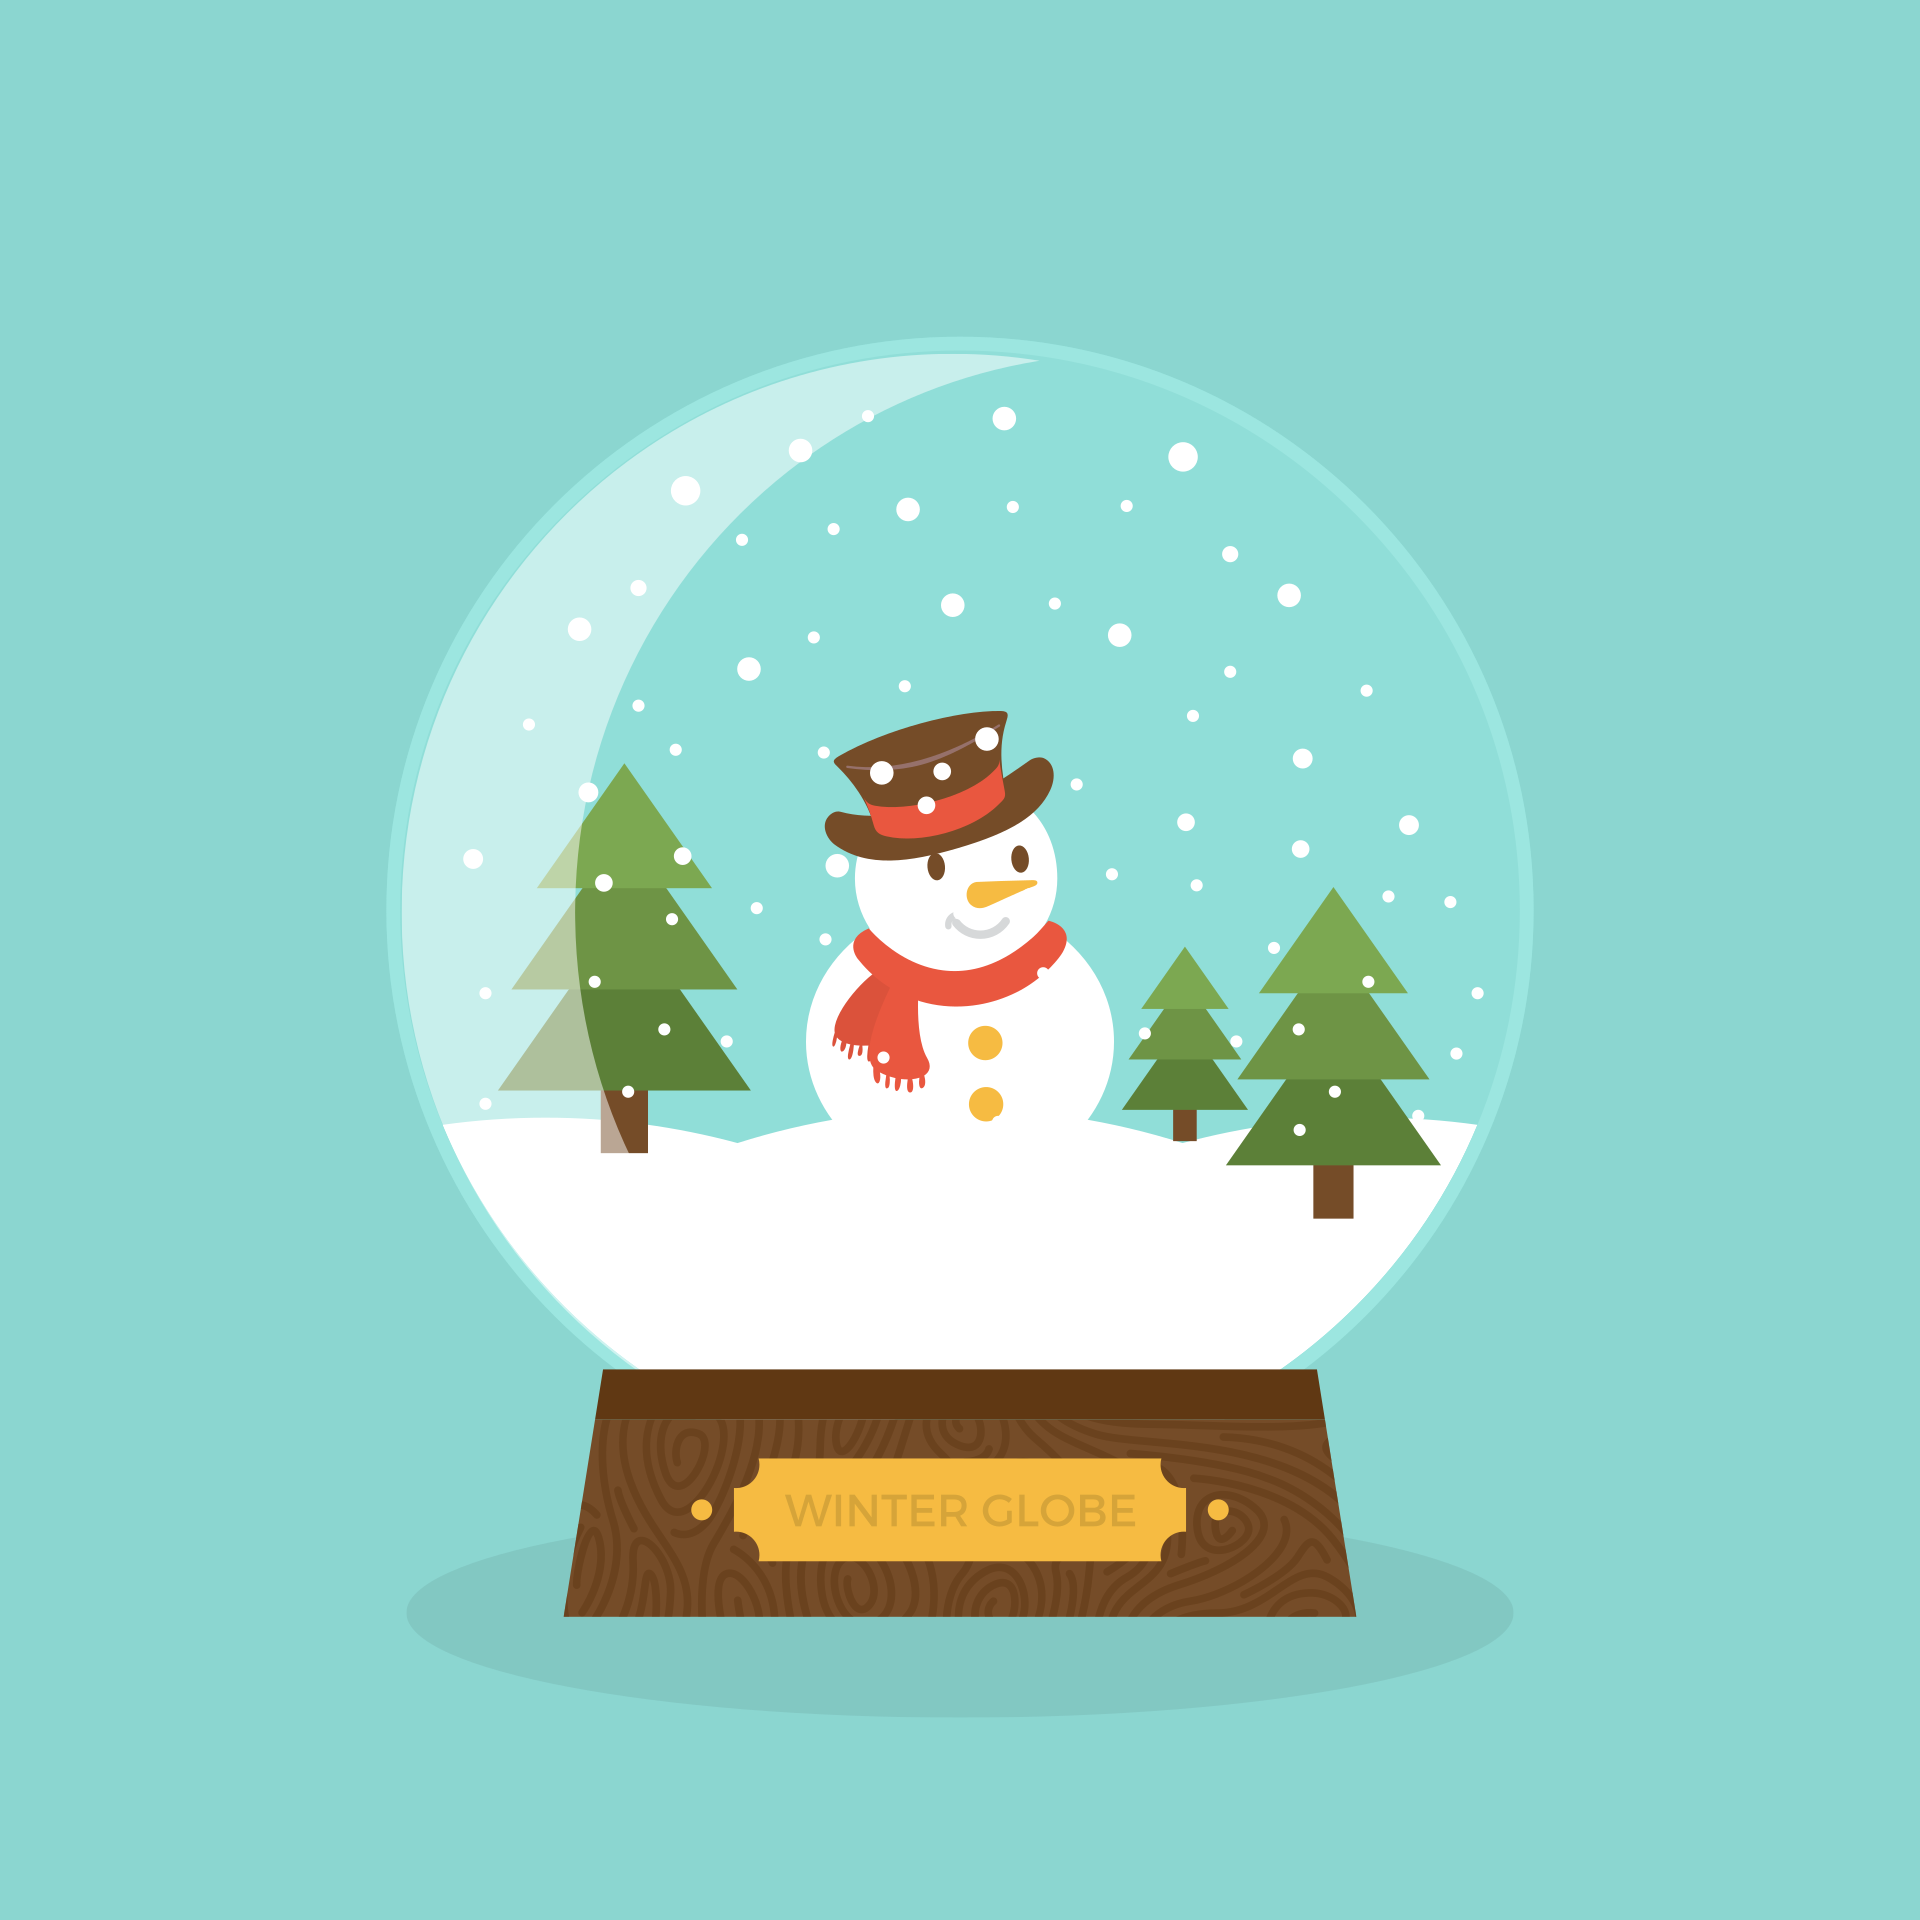 Illustration of a snowman and trees inside a snowglobe.